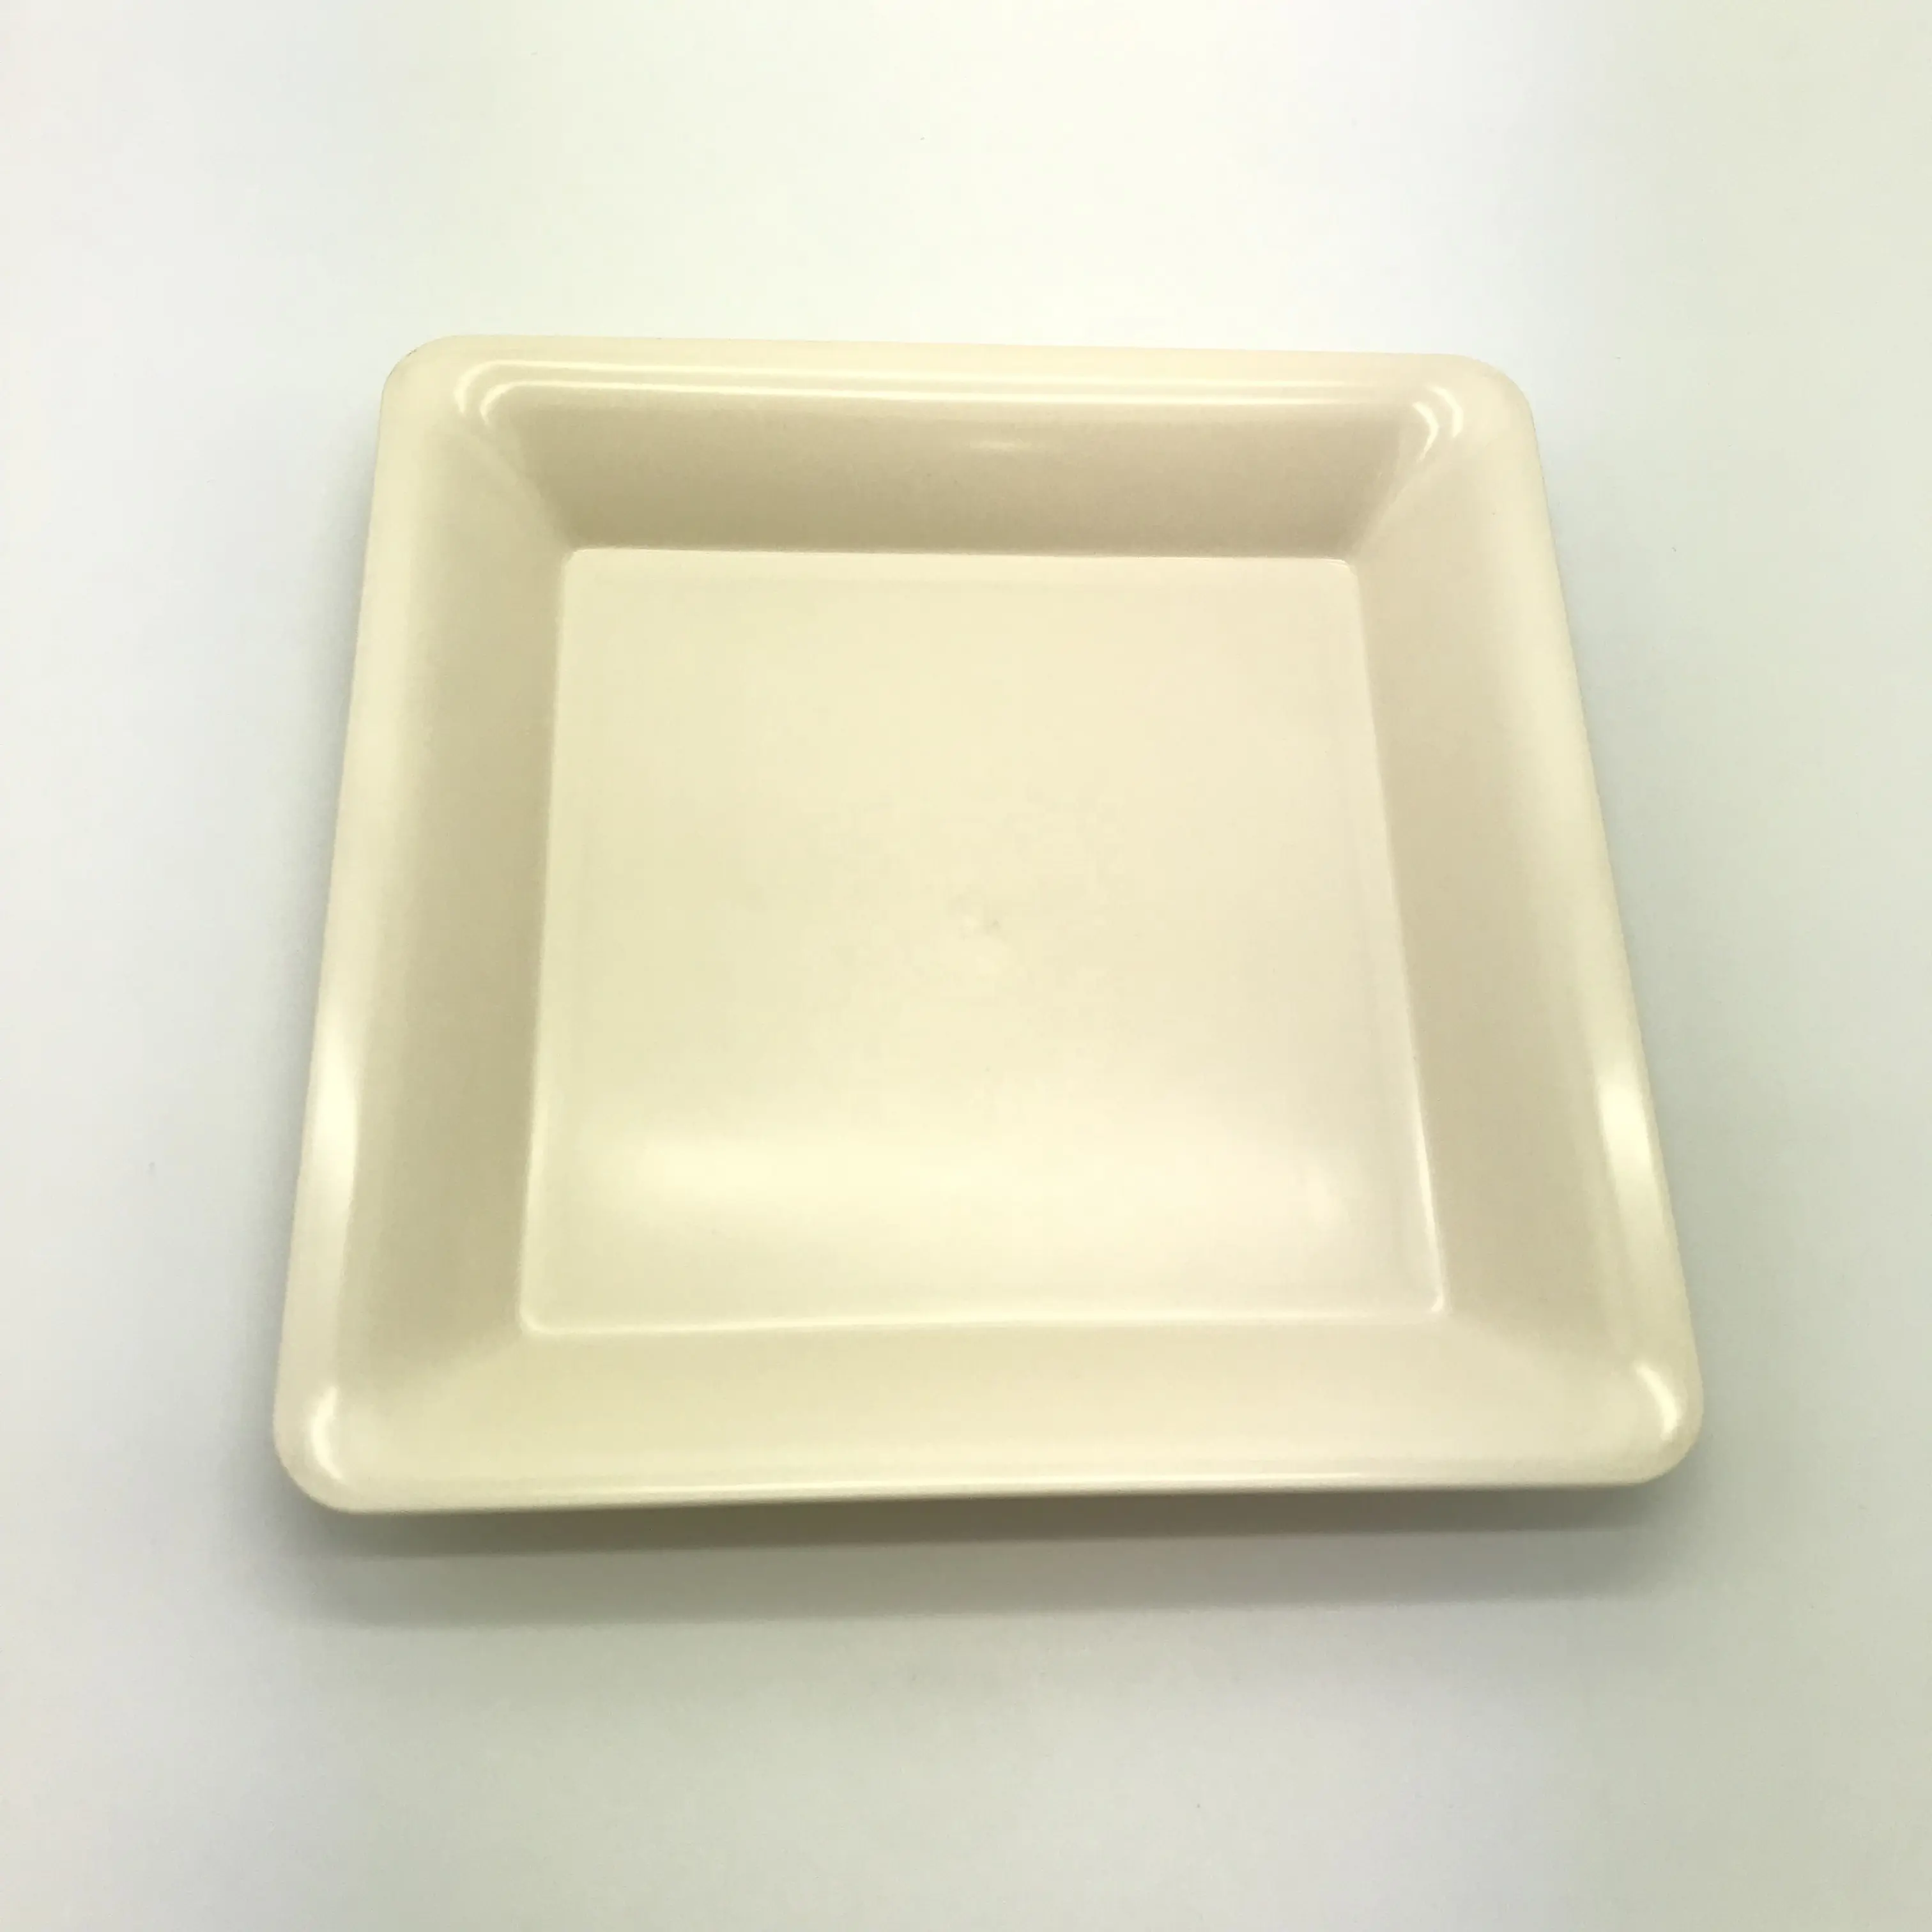 High Quality PLA Square Platter Serving Food Tray